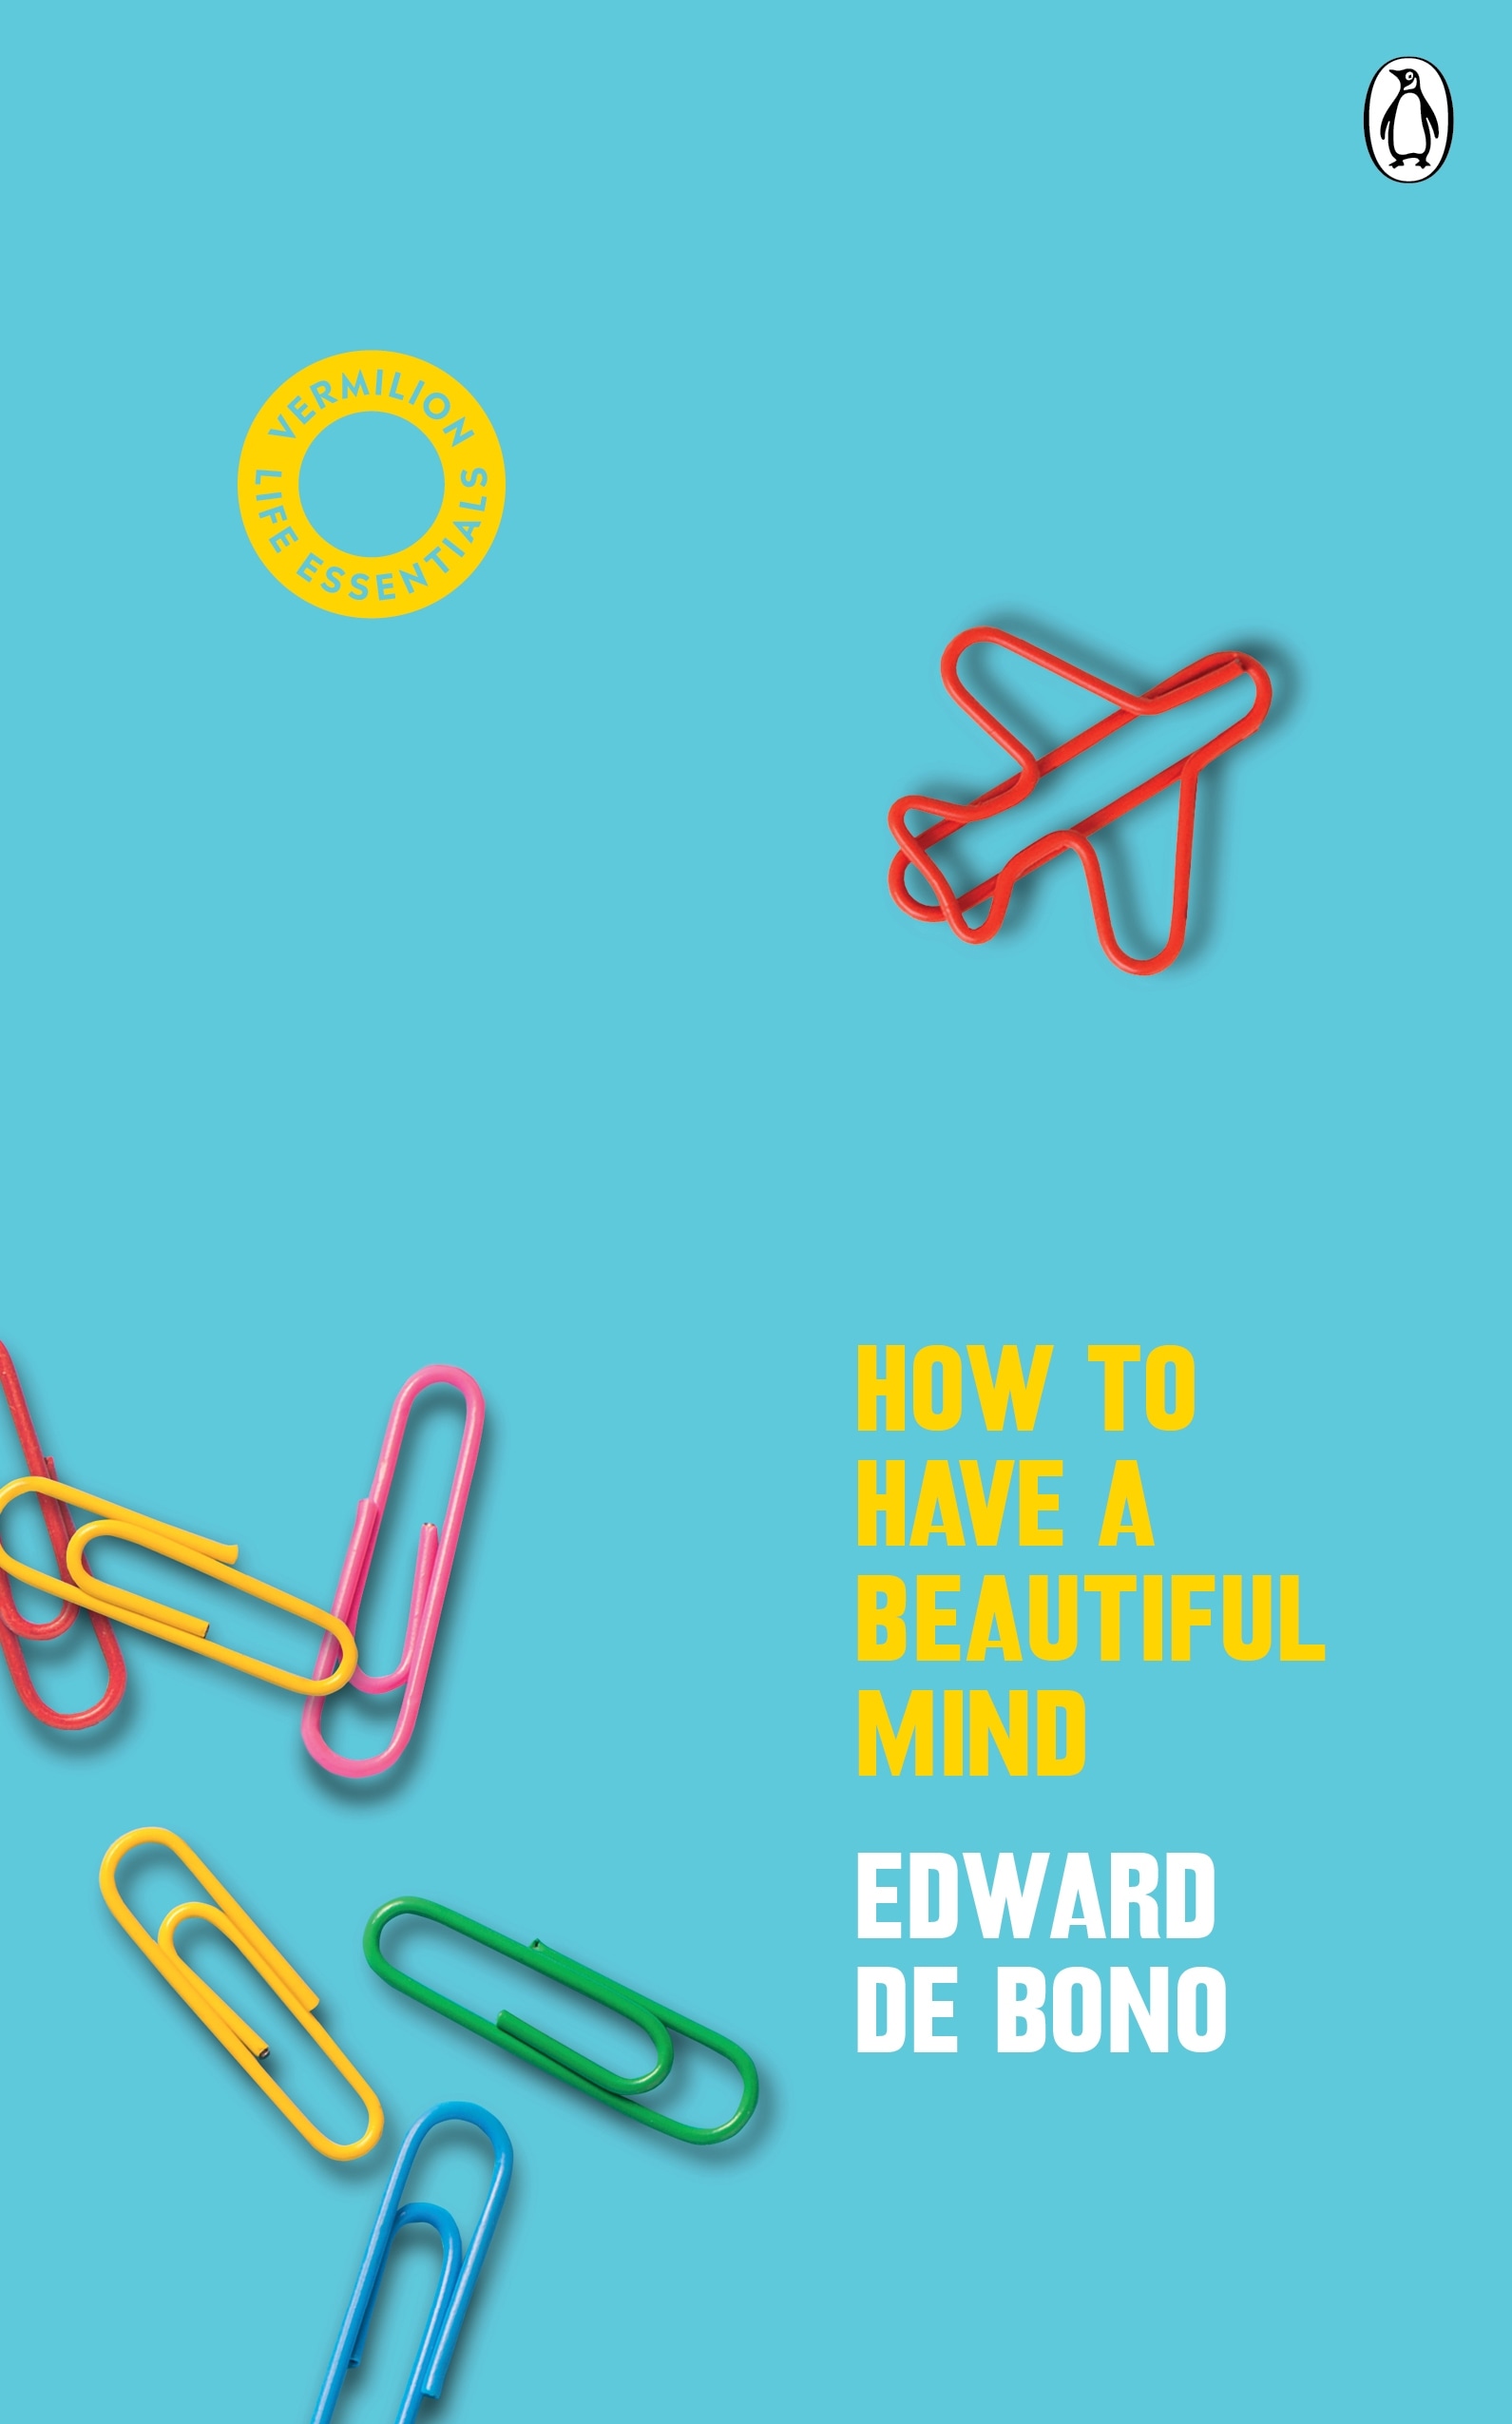 Book “How To Have A Beautiful Mind” by Edward de Bono — August 20, 2020